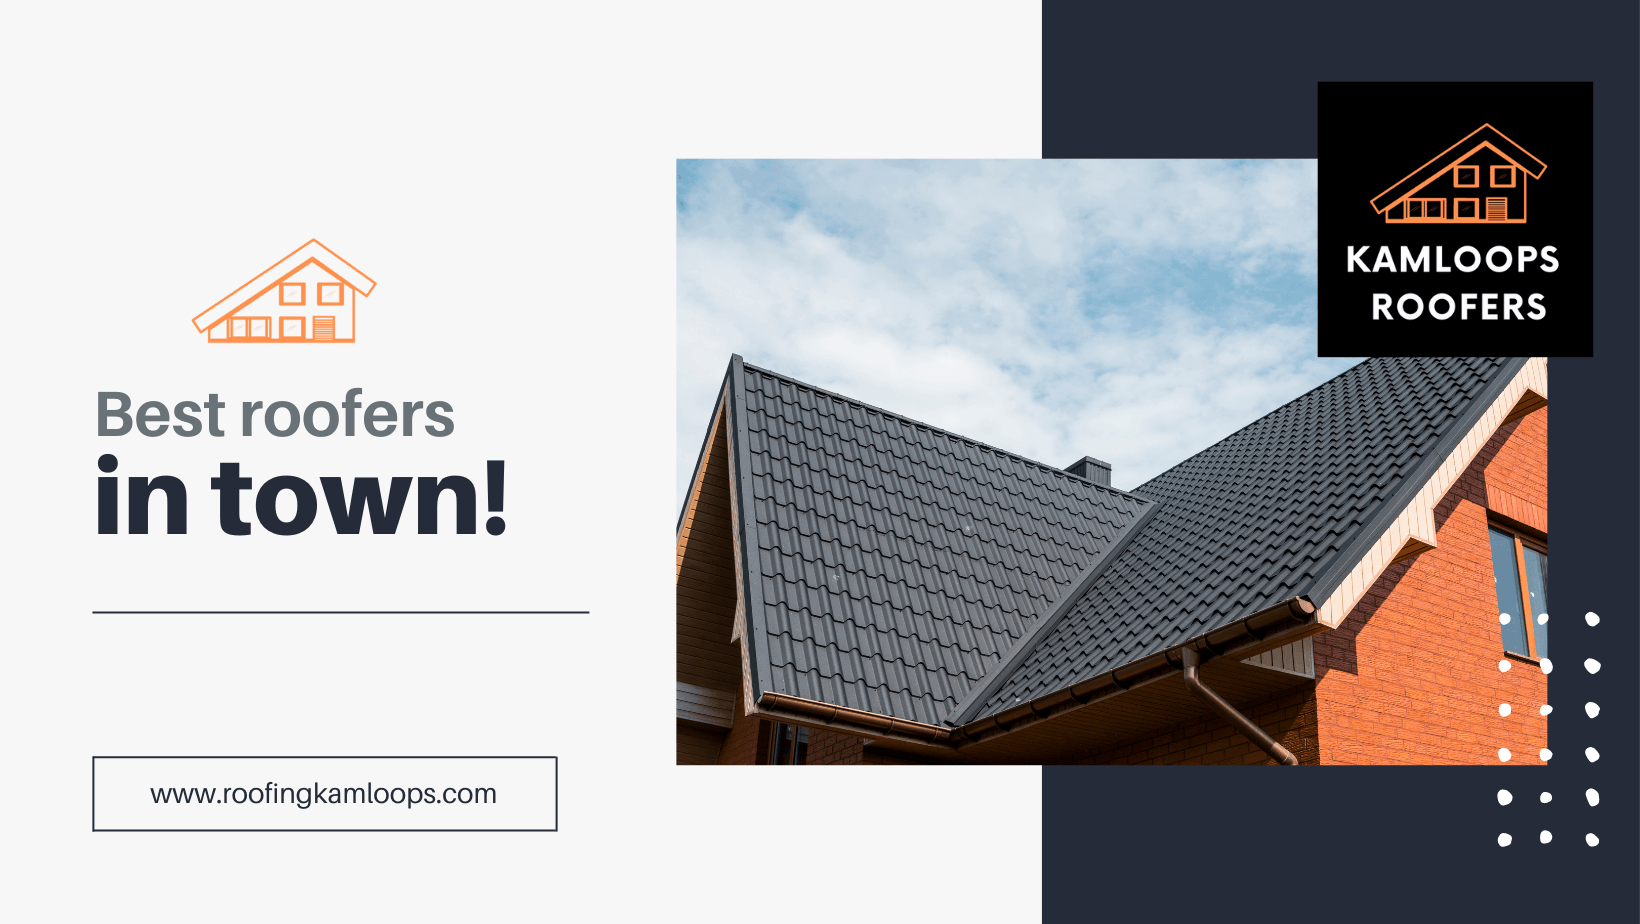 Kamloops Roofing cover photo